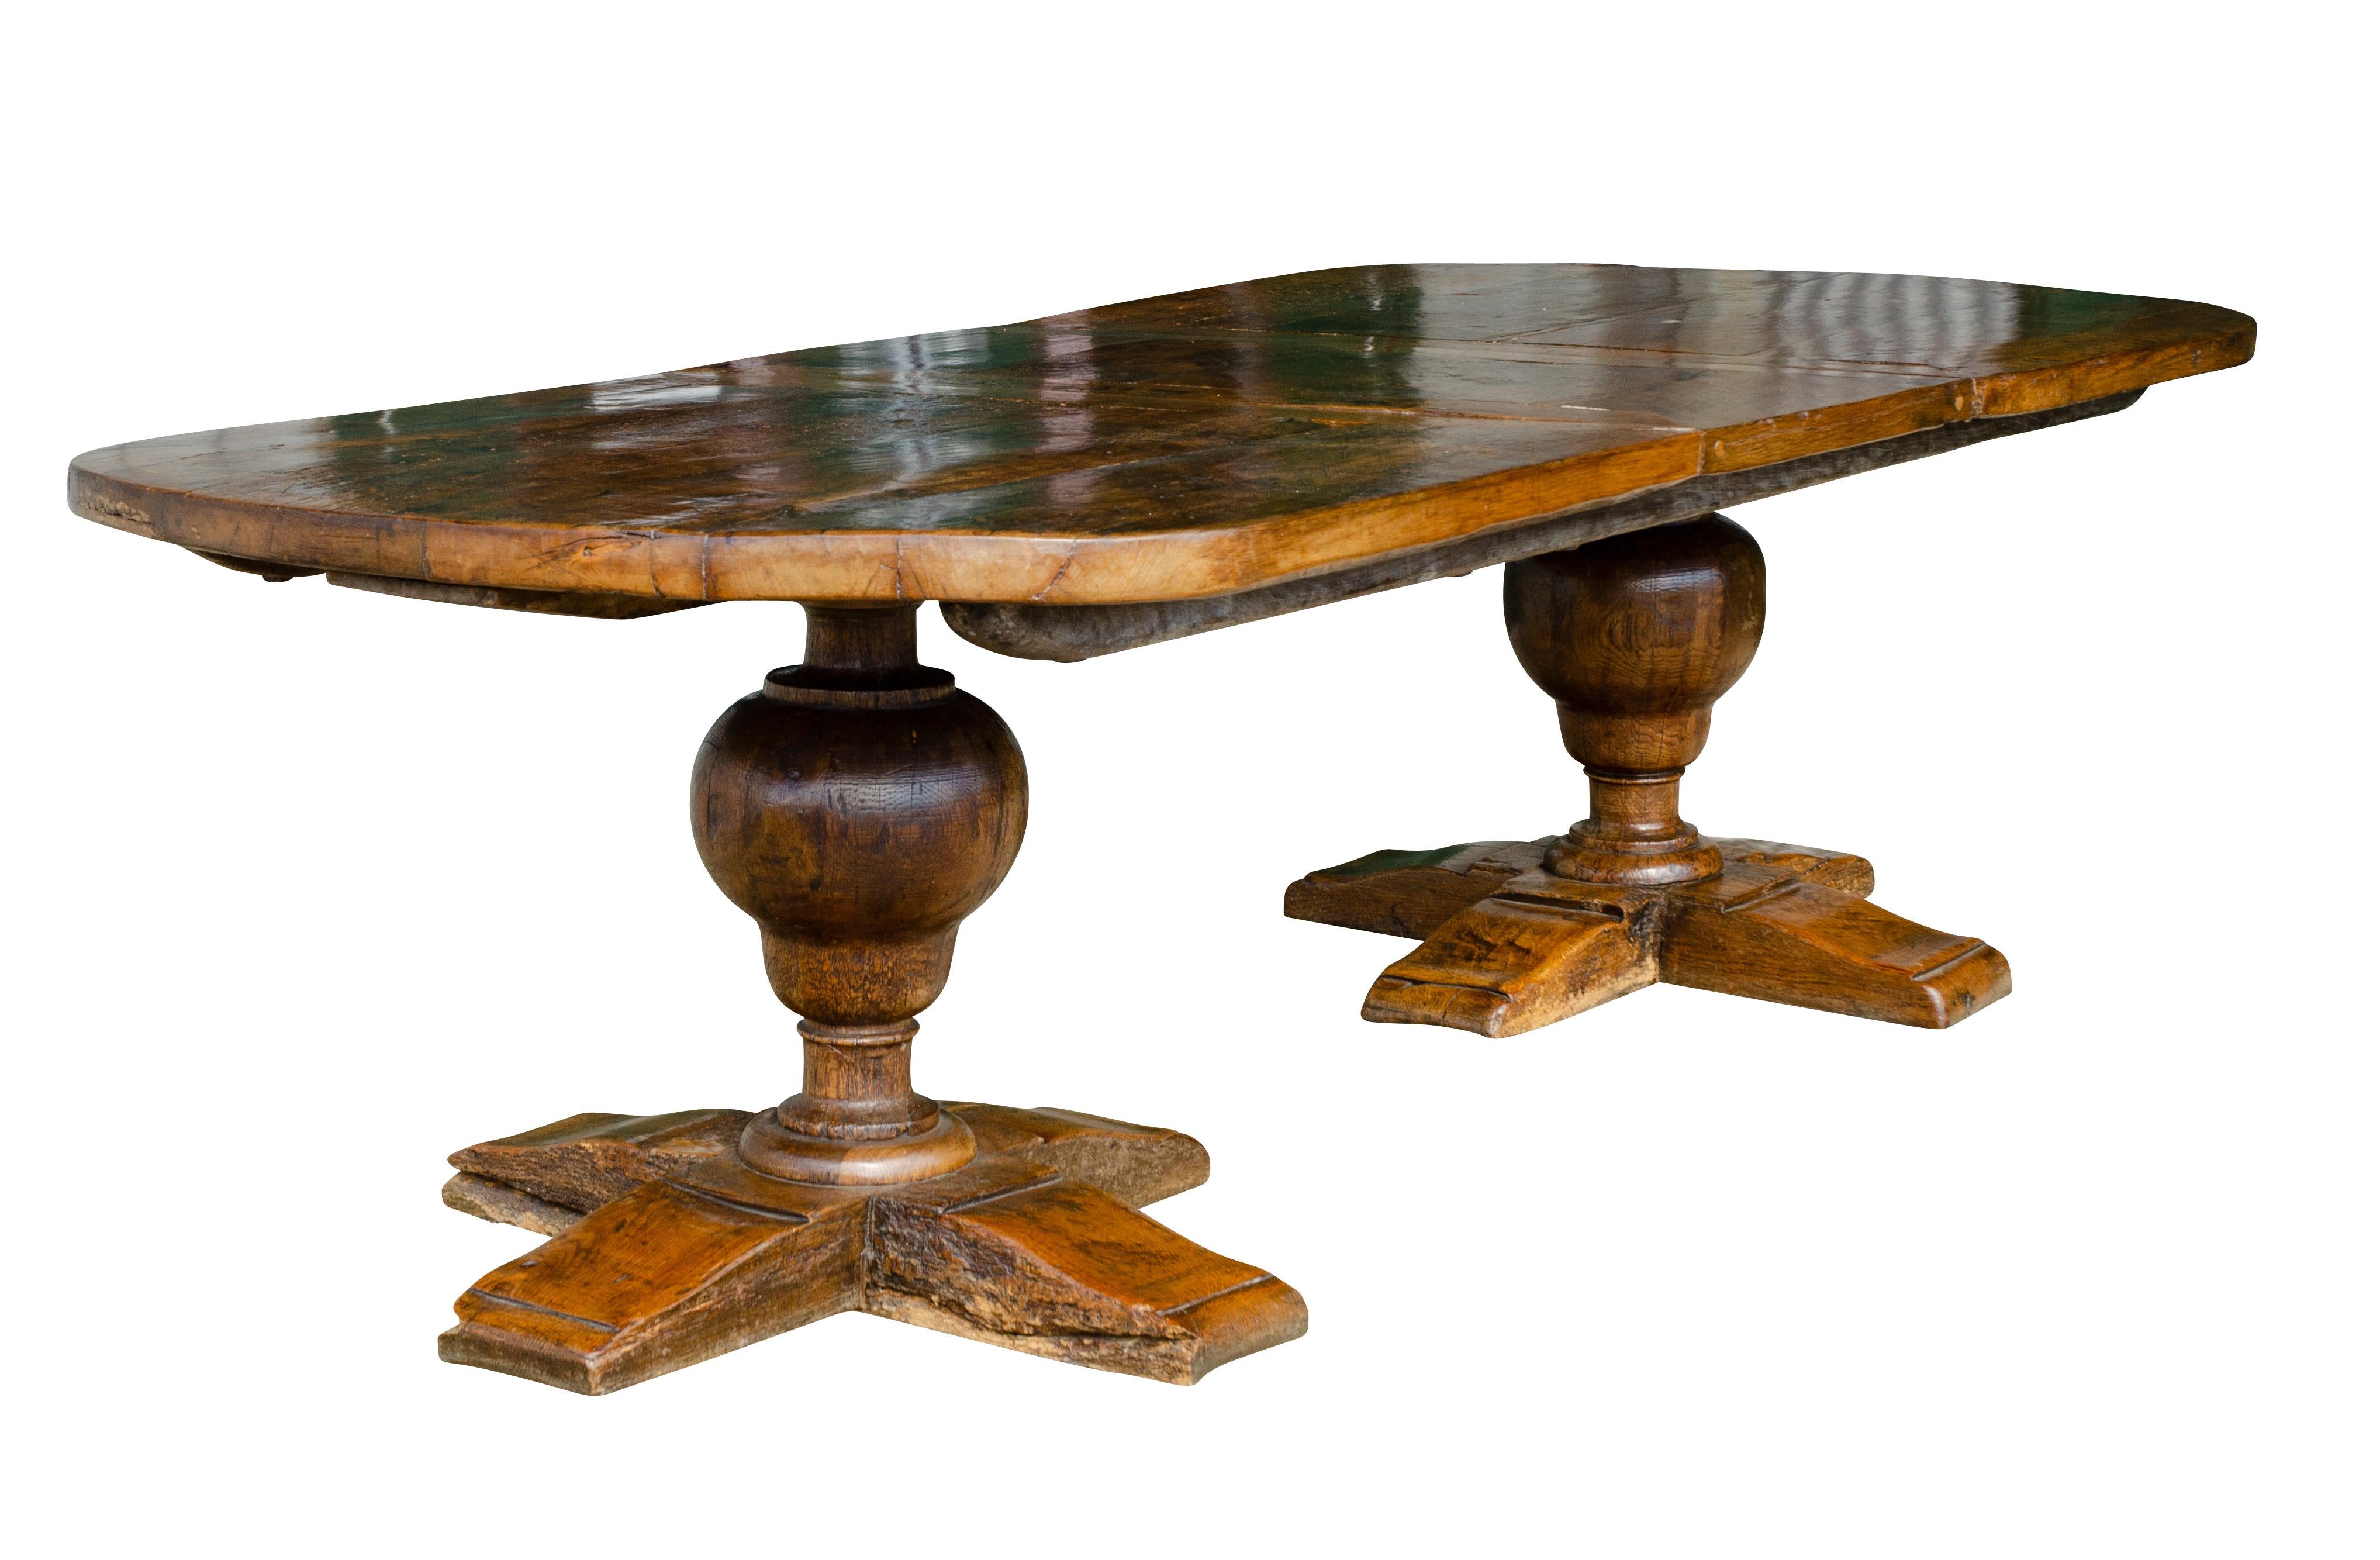 Baroque Revival Flemish Baroque Style Oak Dining Table For Sale